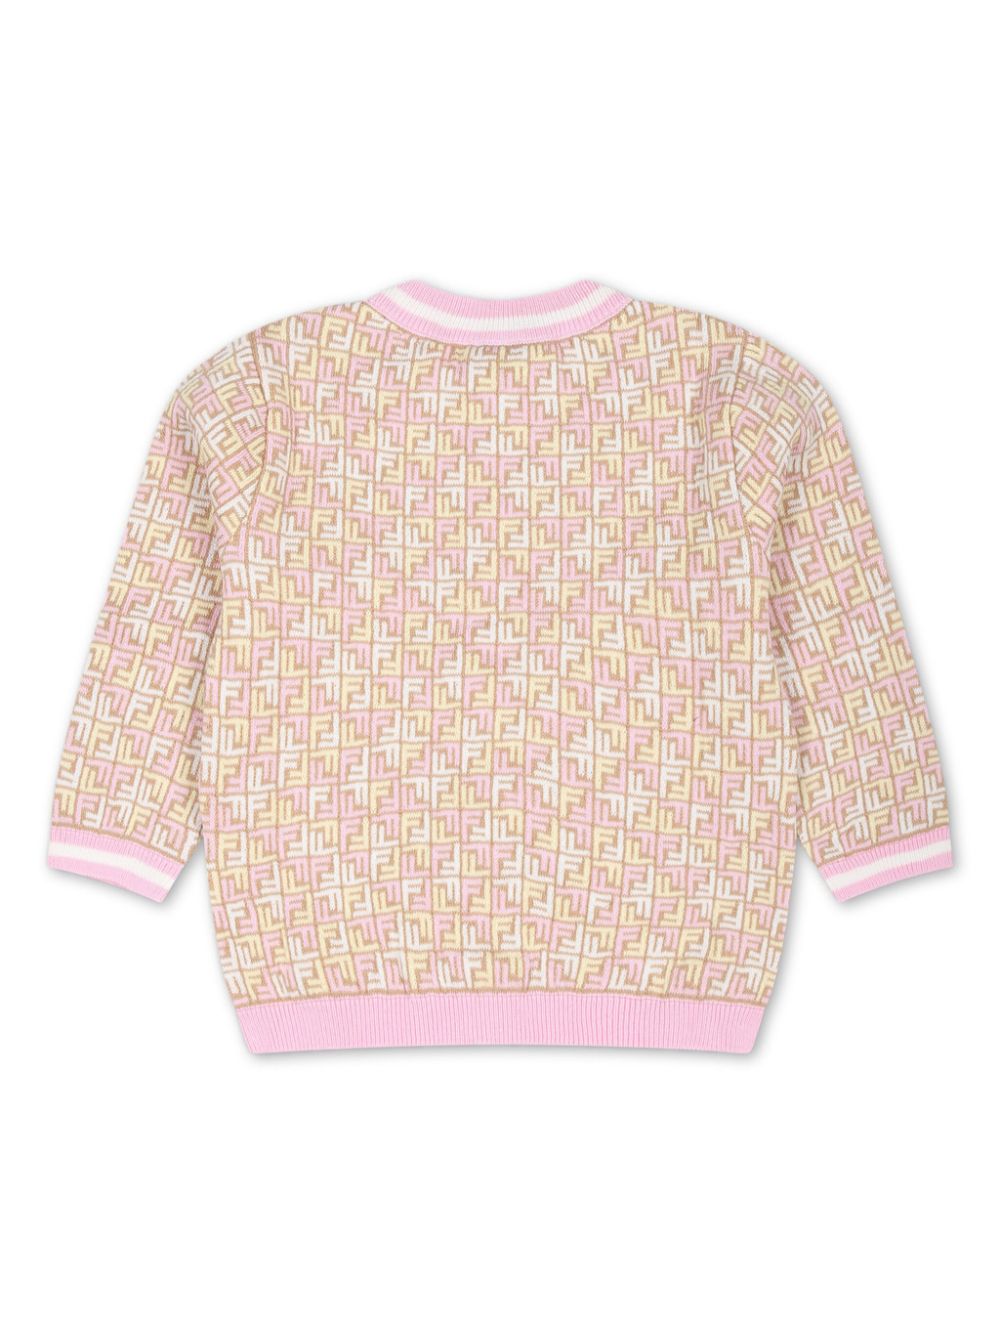 White and pink cardigan for baby girls